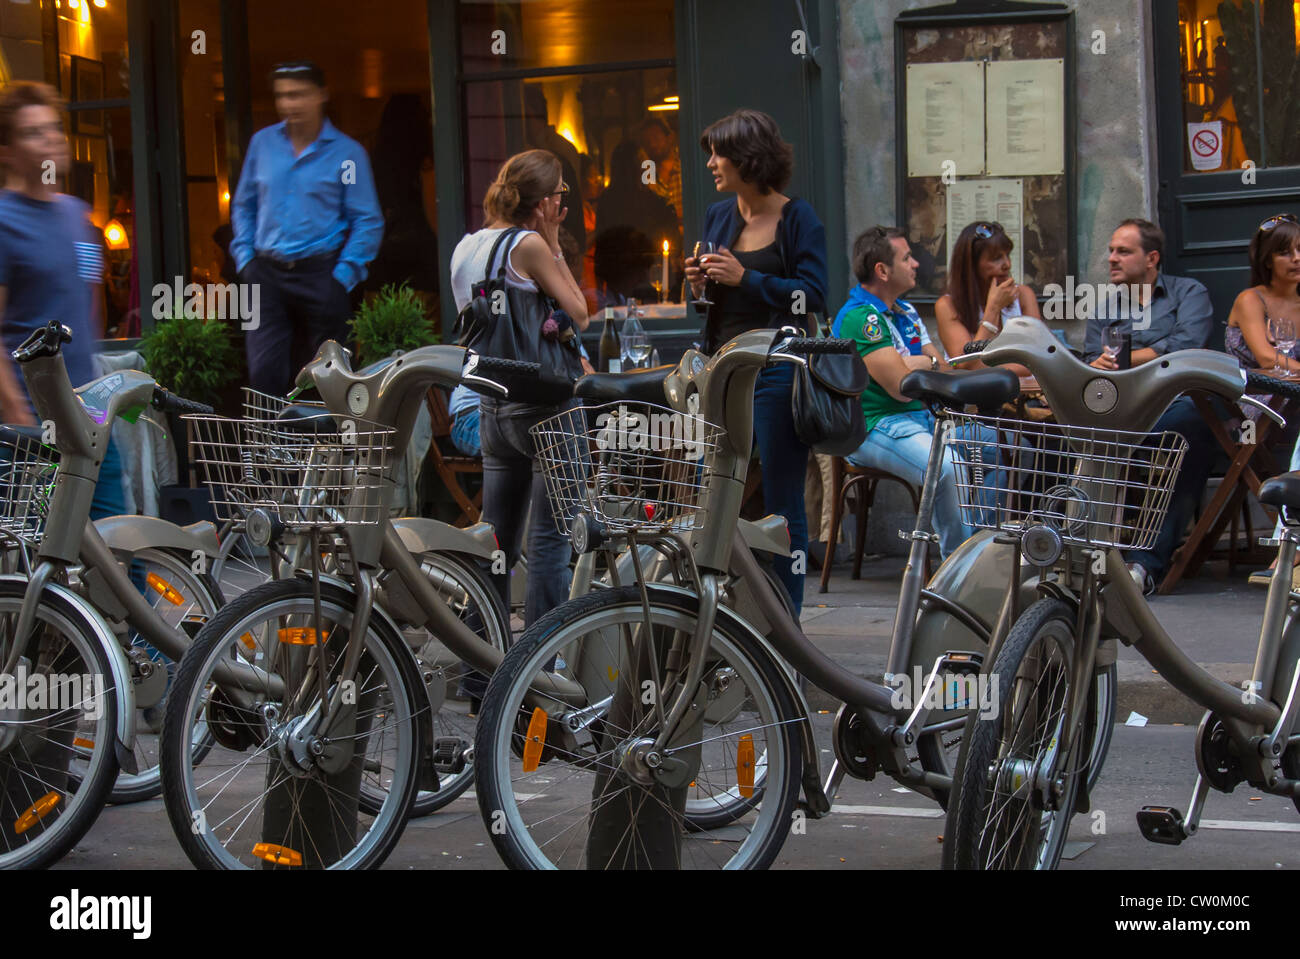 Paris, Cafe, France, Group of Young People, Sharing Drinks on Terrace in Front of French Bar Bistro Restaurant, 'Hotel du Nord' the Canal Saint Martin, Parisian busy street scene JCDecaux, cafe cycling Stock Photo